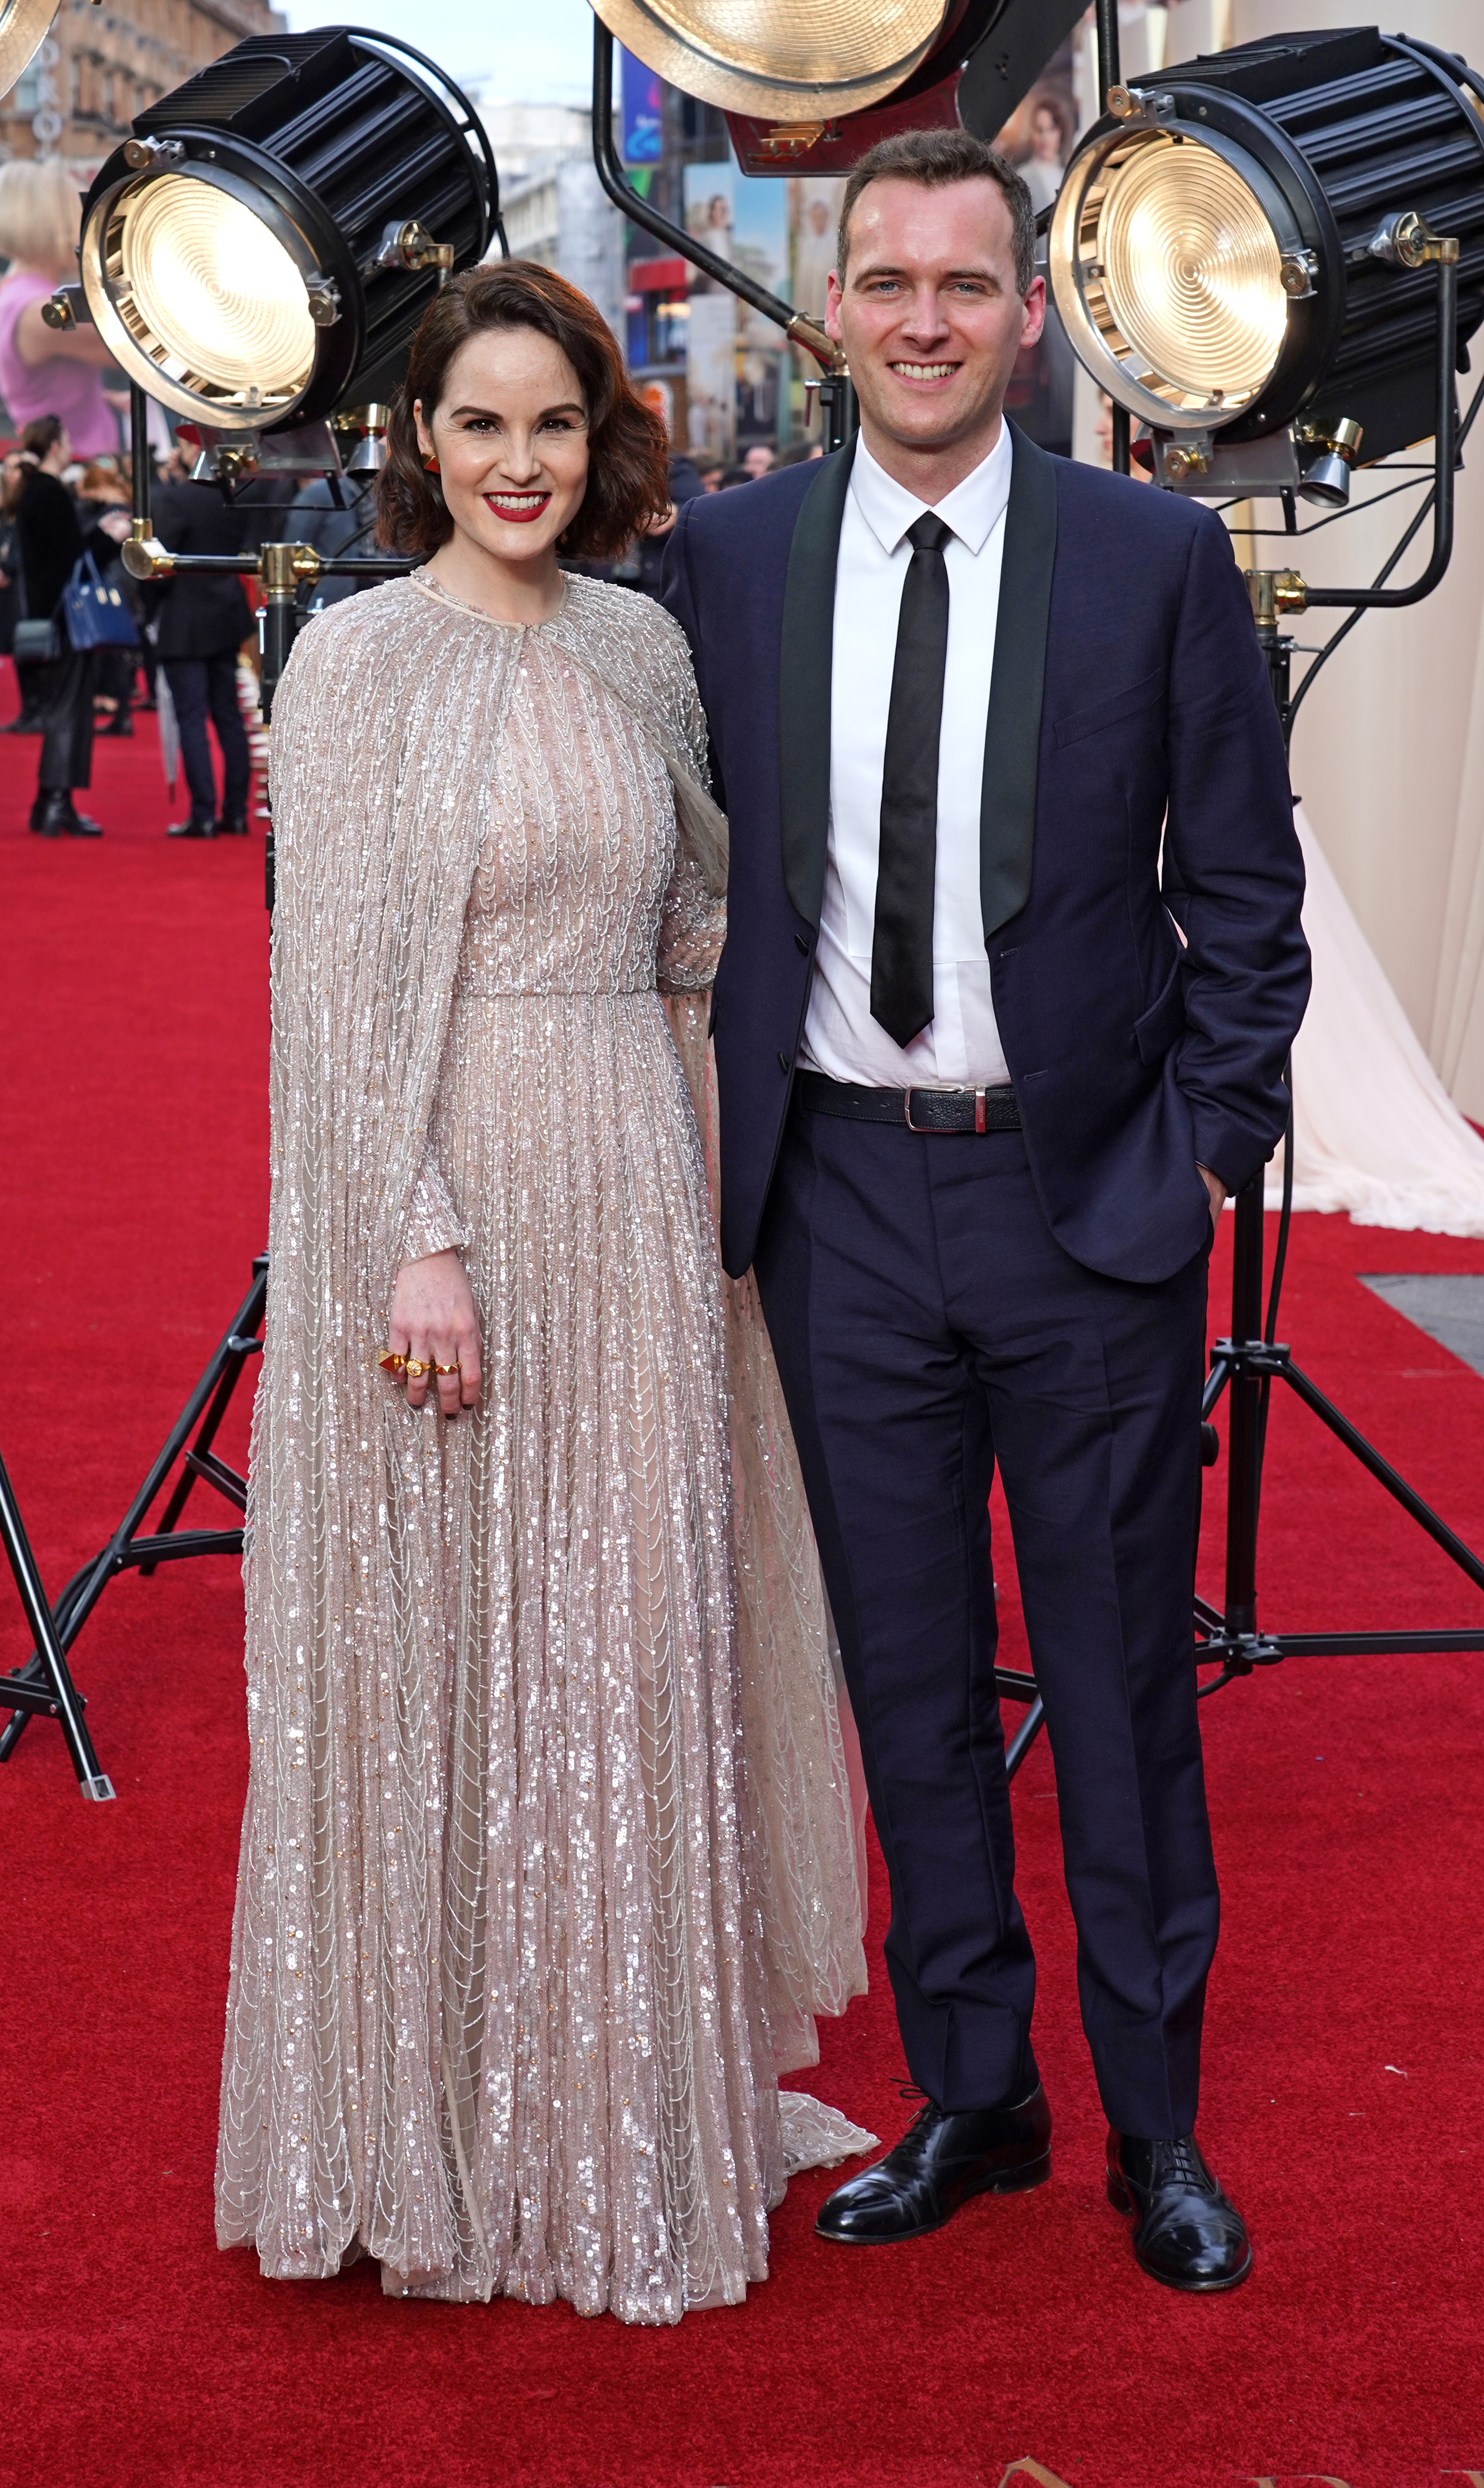 Michelle Dockery and Jasper Waller-Bridge attending the world premiere of "Downton Abbey: A New Era" at Cineworld Leicester Square on April 25, 2022, in London, England | Source: Getty Images